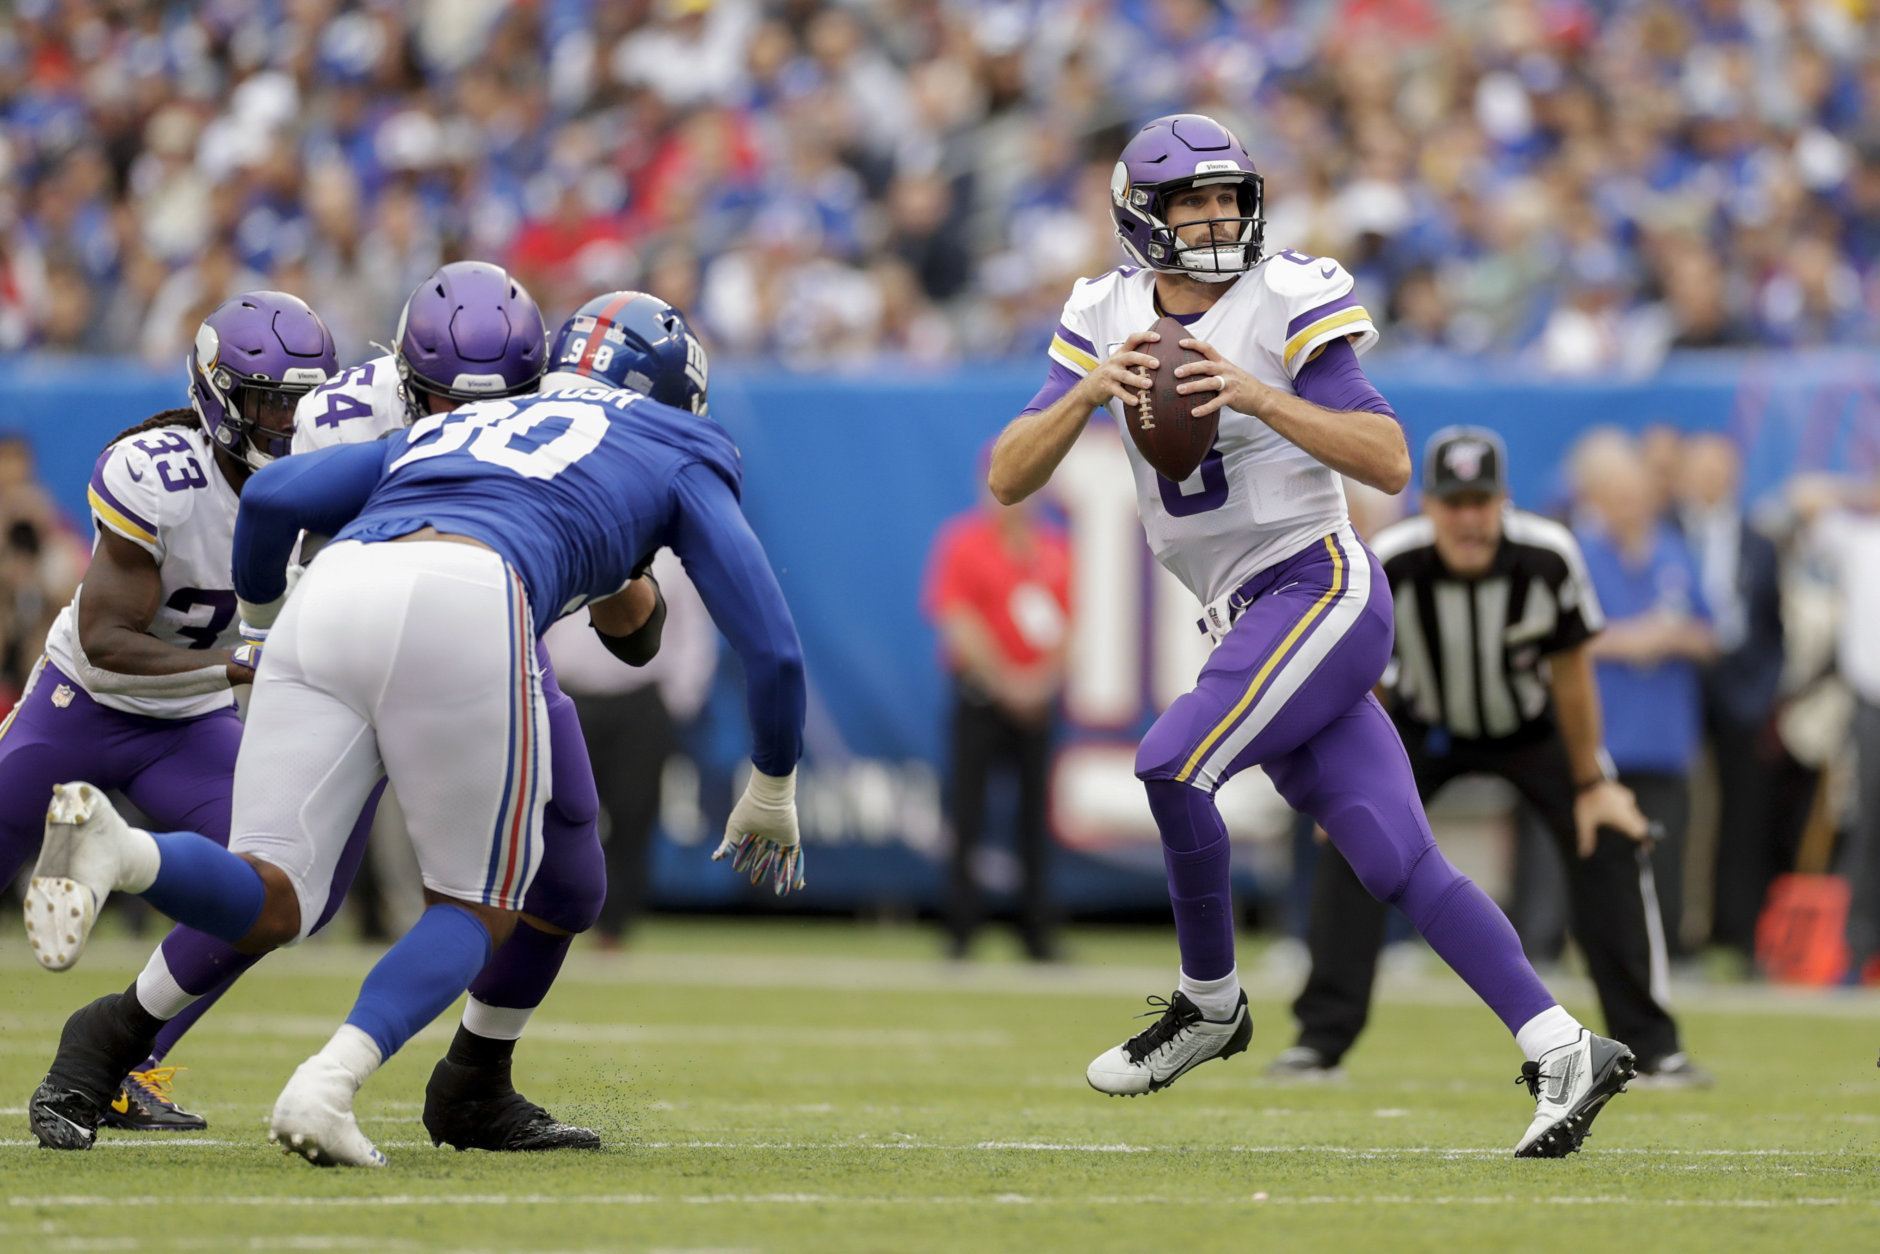 <p><b><i>Vikings 28</i></b><br />
<b><i>Giants 10</i></b></p>
<p>At least for a week, all the talk Kirk Cousins <a href="https://profootballtalk.nbcsports.com/2019/10/03/kirk-couisns-on-negative-reactions-ignorance-is-bliss/">swears he never hears</a> about his inaccuracy is minimized and <a href="https://profootballtalk.nbcsports.com/2019/10/06/adam-thielen-proud-of-how-kirk-cousins-vikings-responded/" target="_blank" rel="noopener">all is well with him and his receivers</a>. But the minute he puts up another stinker, trust and believe I will break out <a href="https://twitter.com/HoodieSiakam/status/1179170695298928640?s=20  ">his old baby gender reveal video</a> &#8212; whether he sees it or not.</p>
